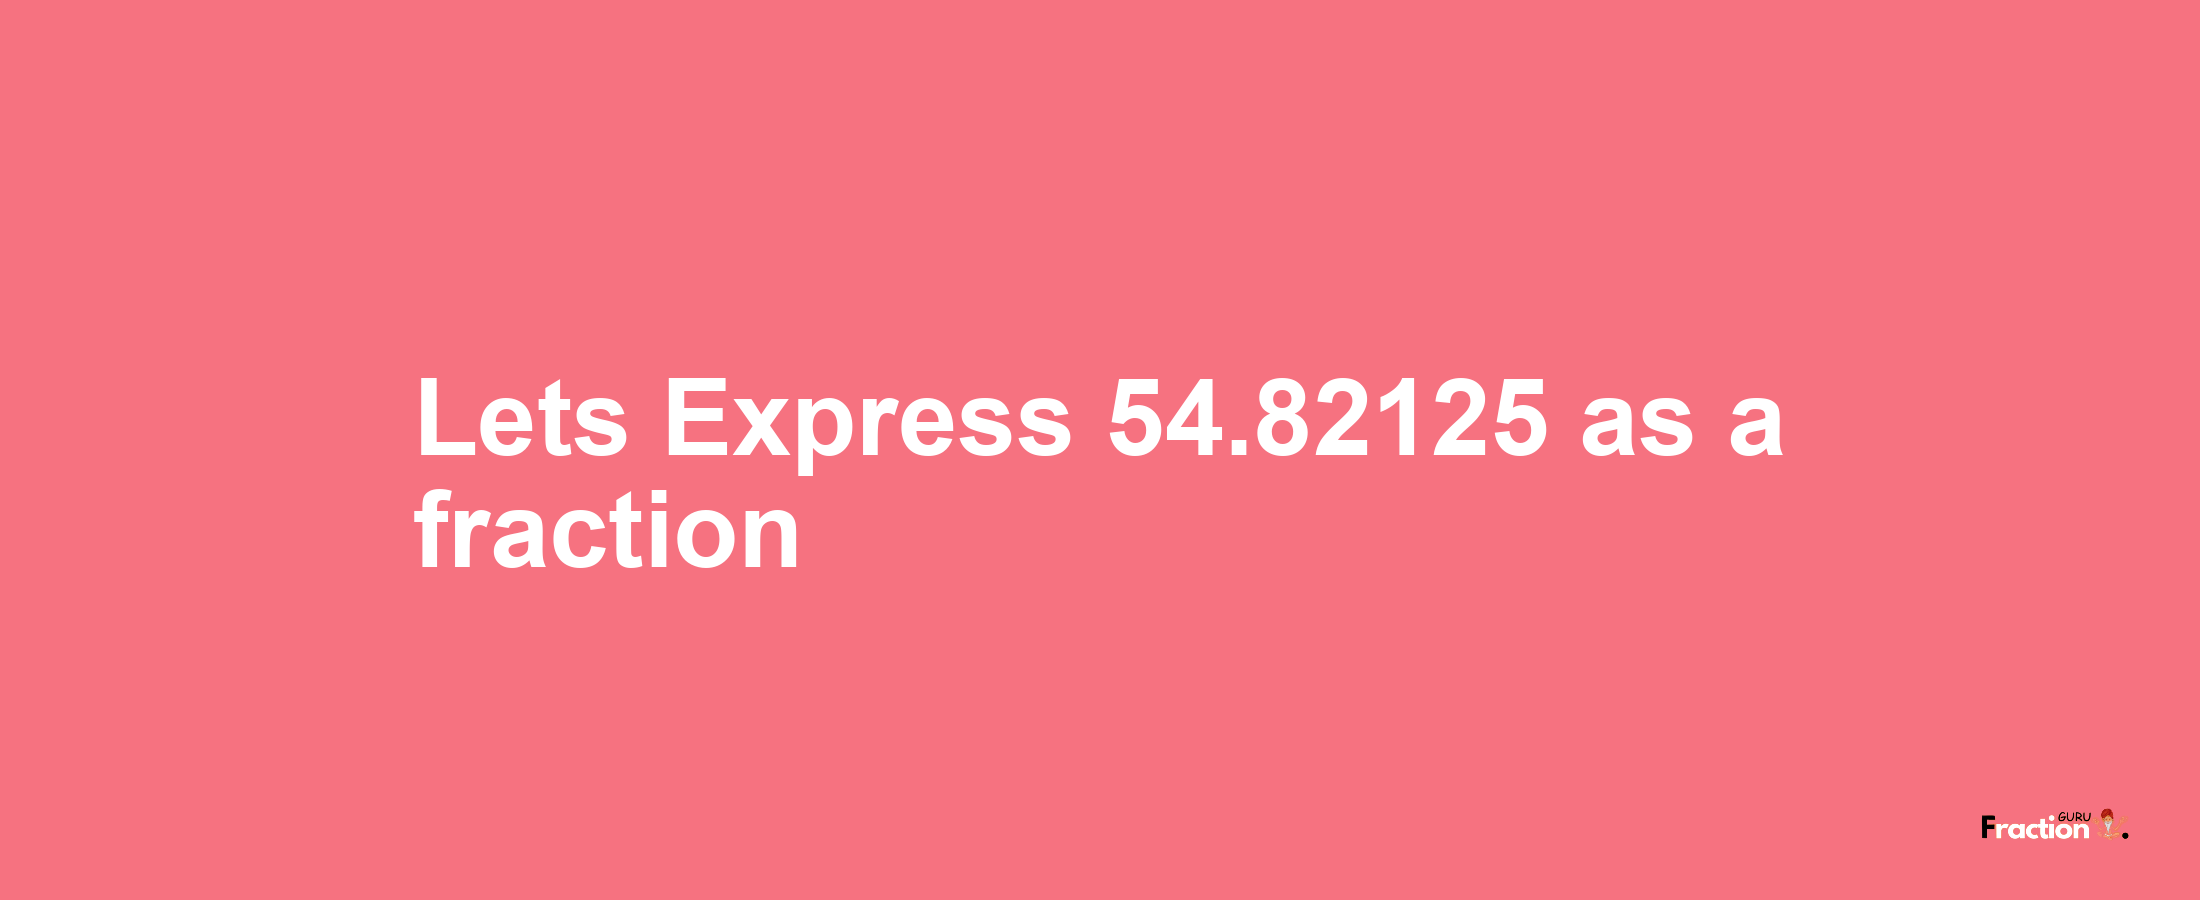 Lets Express 54.82125 as afraction